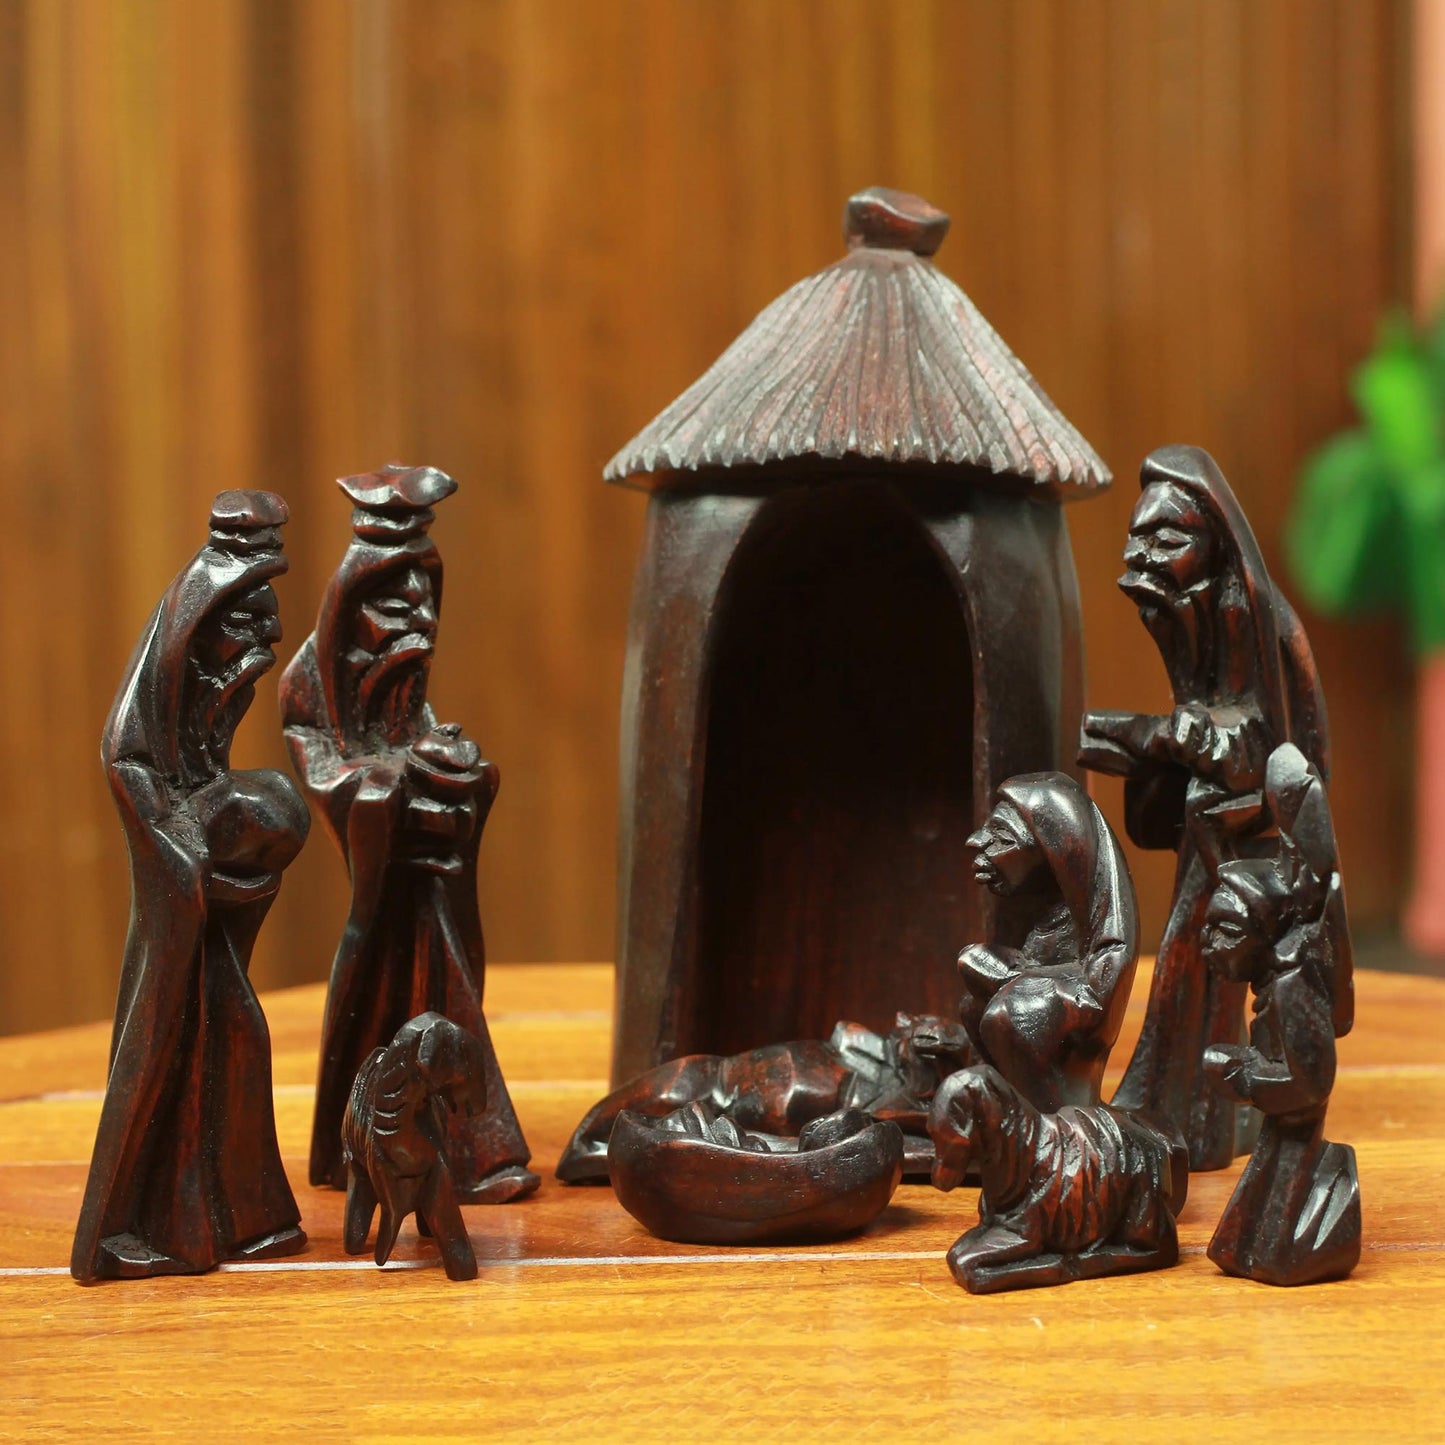 Gifts from the Ghanaian Magi Handcrafted Teak Wood Nativity Scene Sculpture (14 Piece)